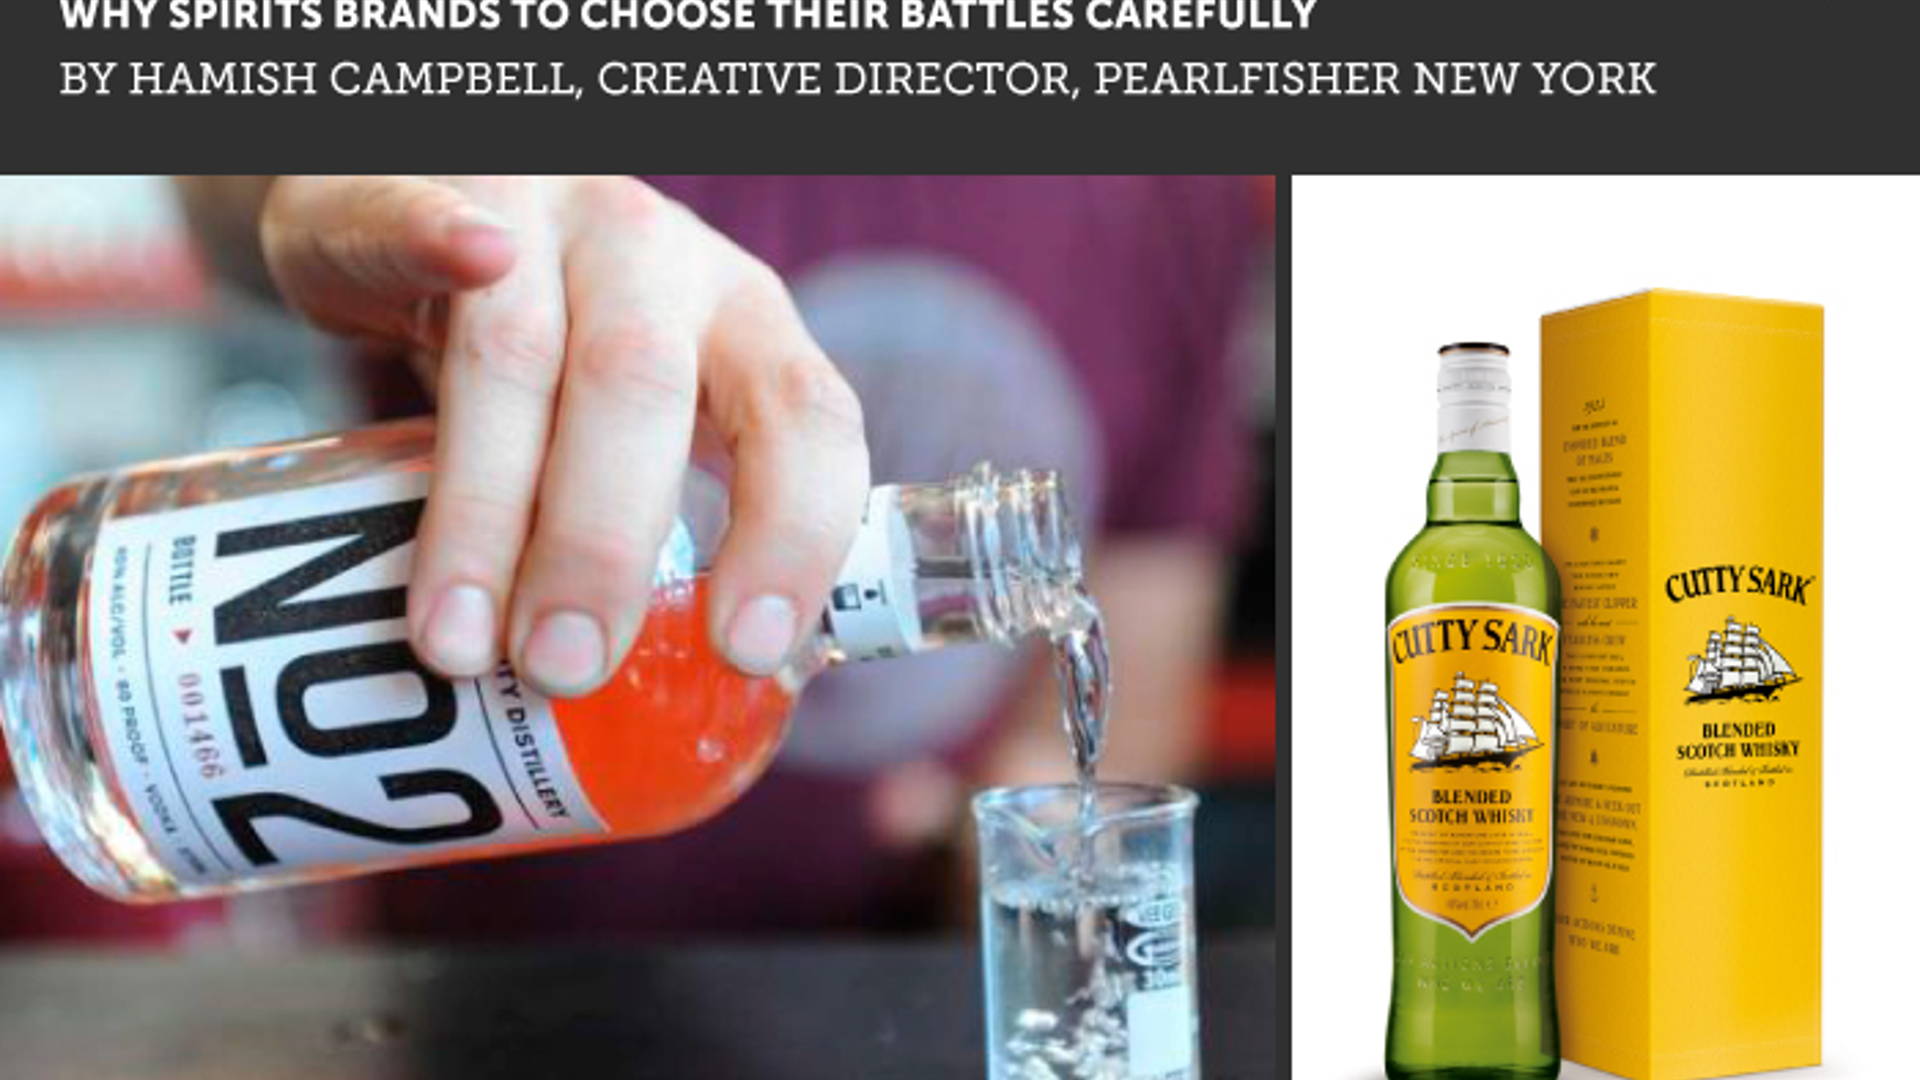 Featured image for Spirits Rule: Why Spirits Brands Need To Choose Their Battles Carefully 